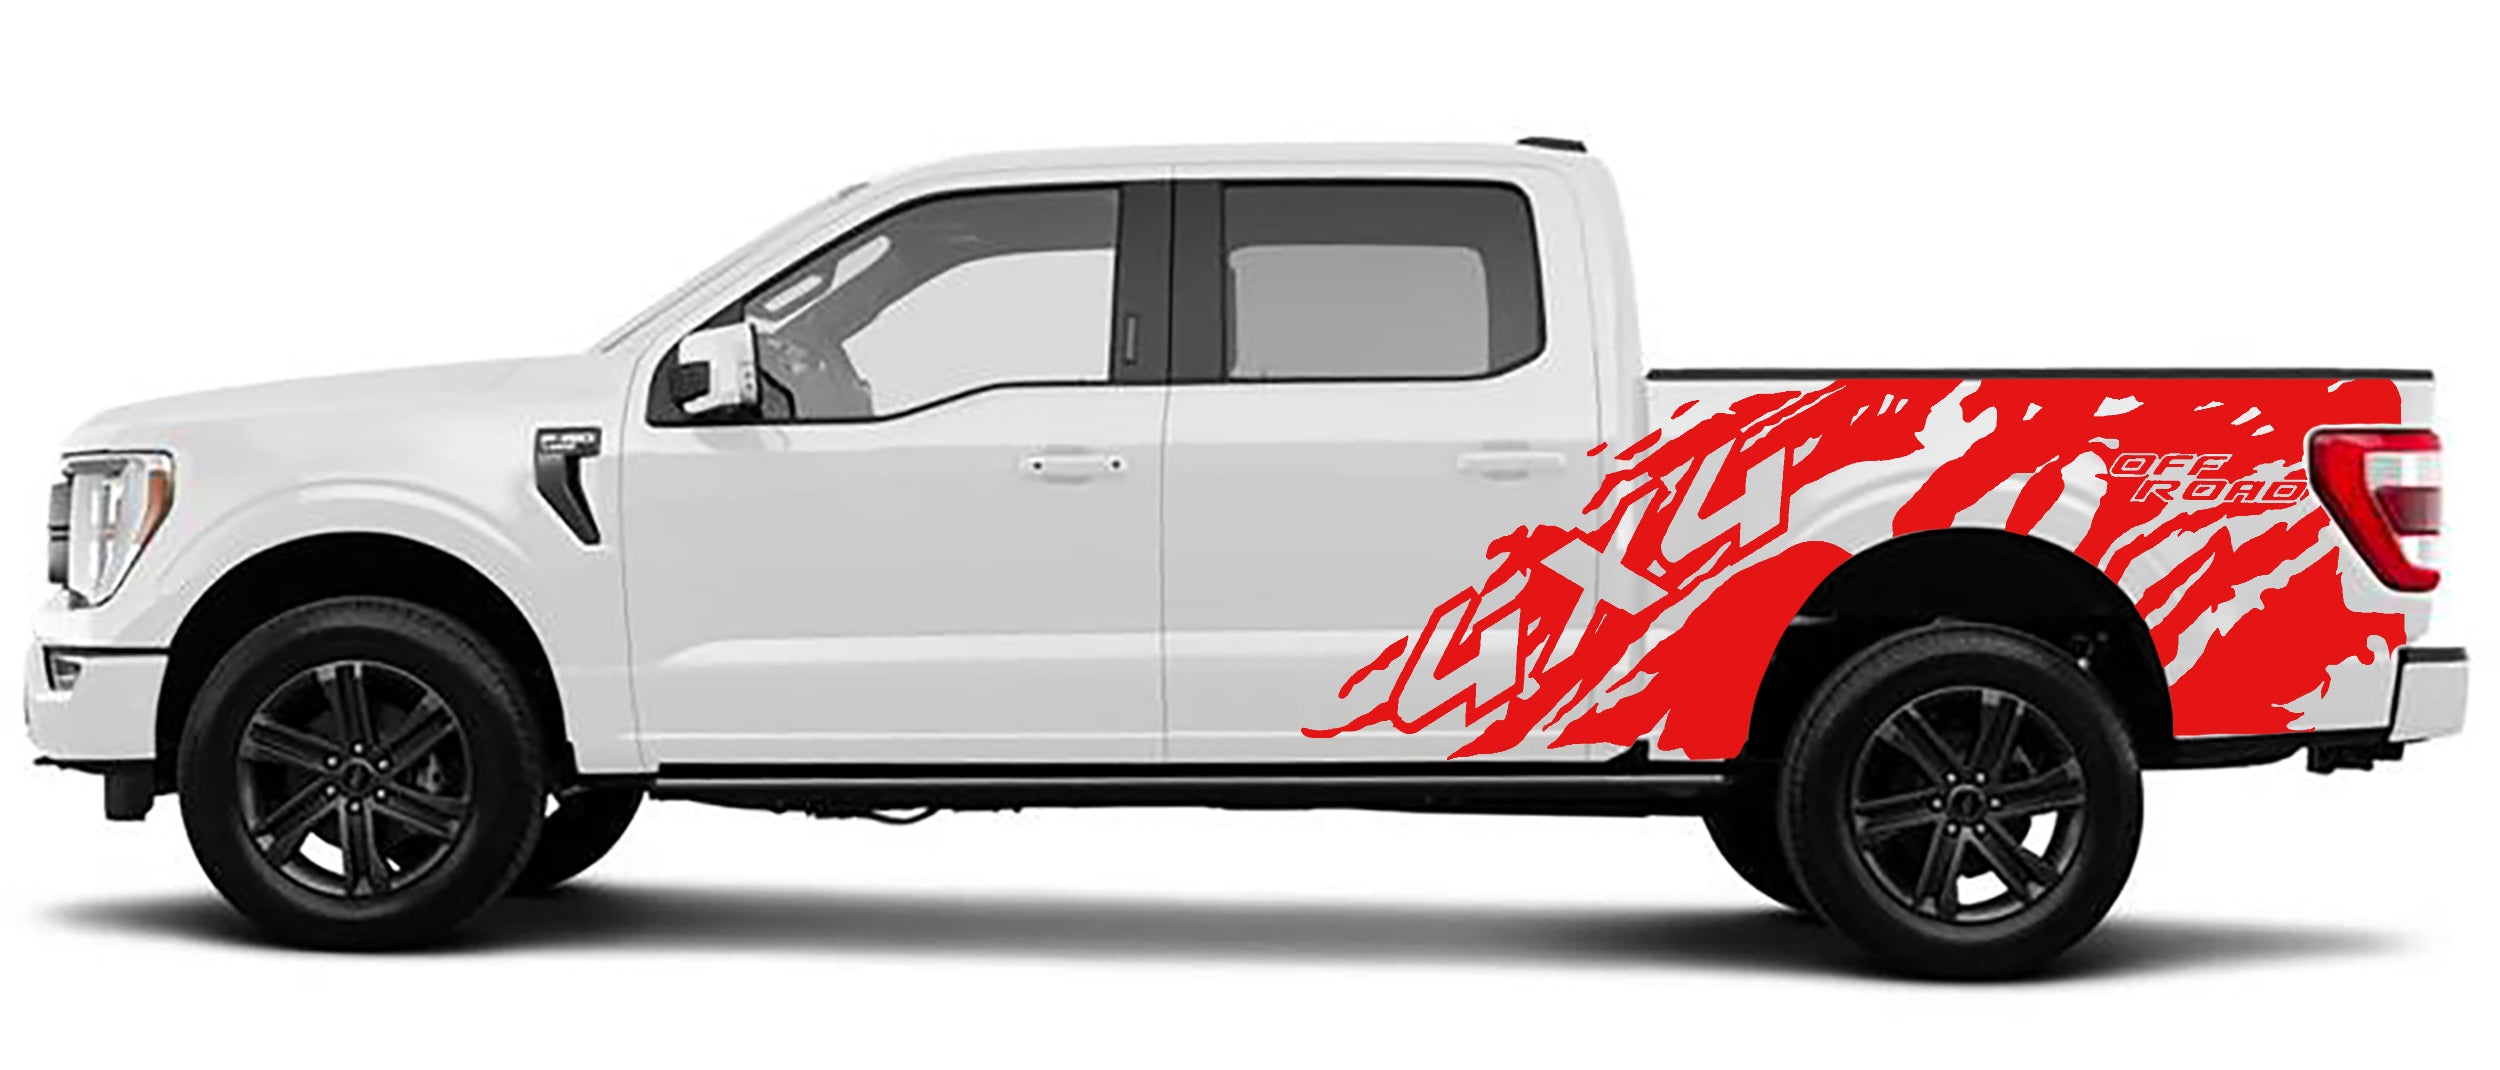 4x4 off road side graphics for ford f 150 2021 to 2023 models red